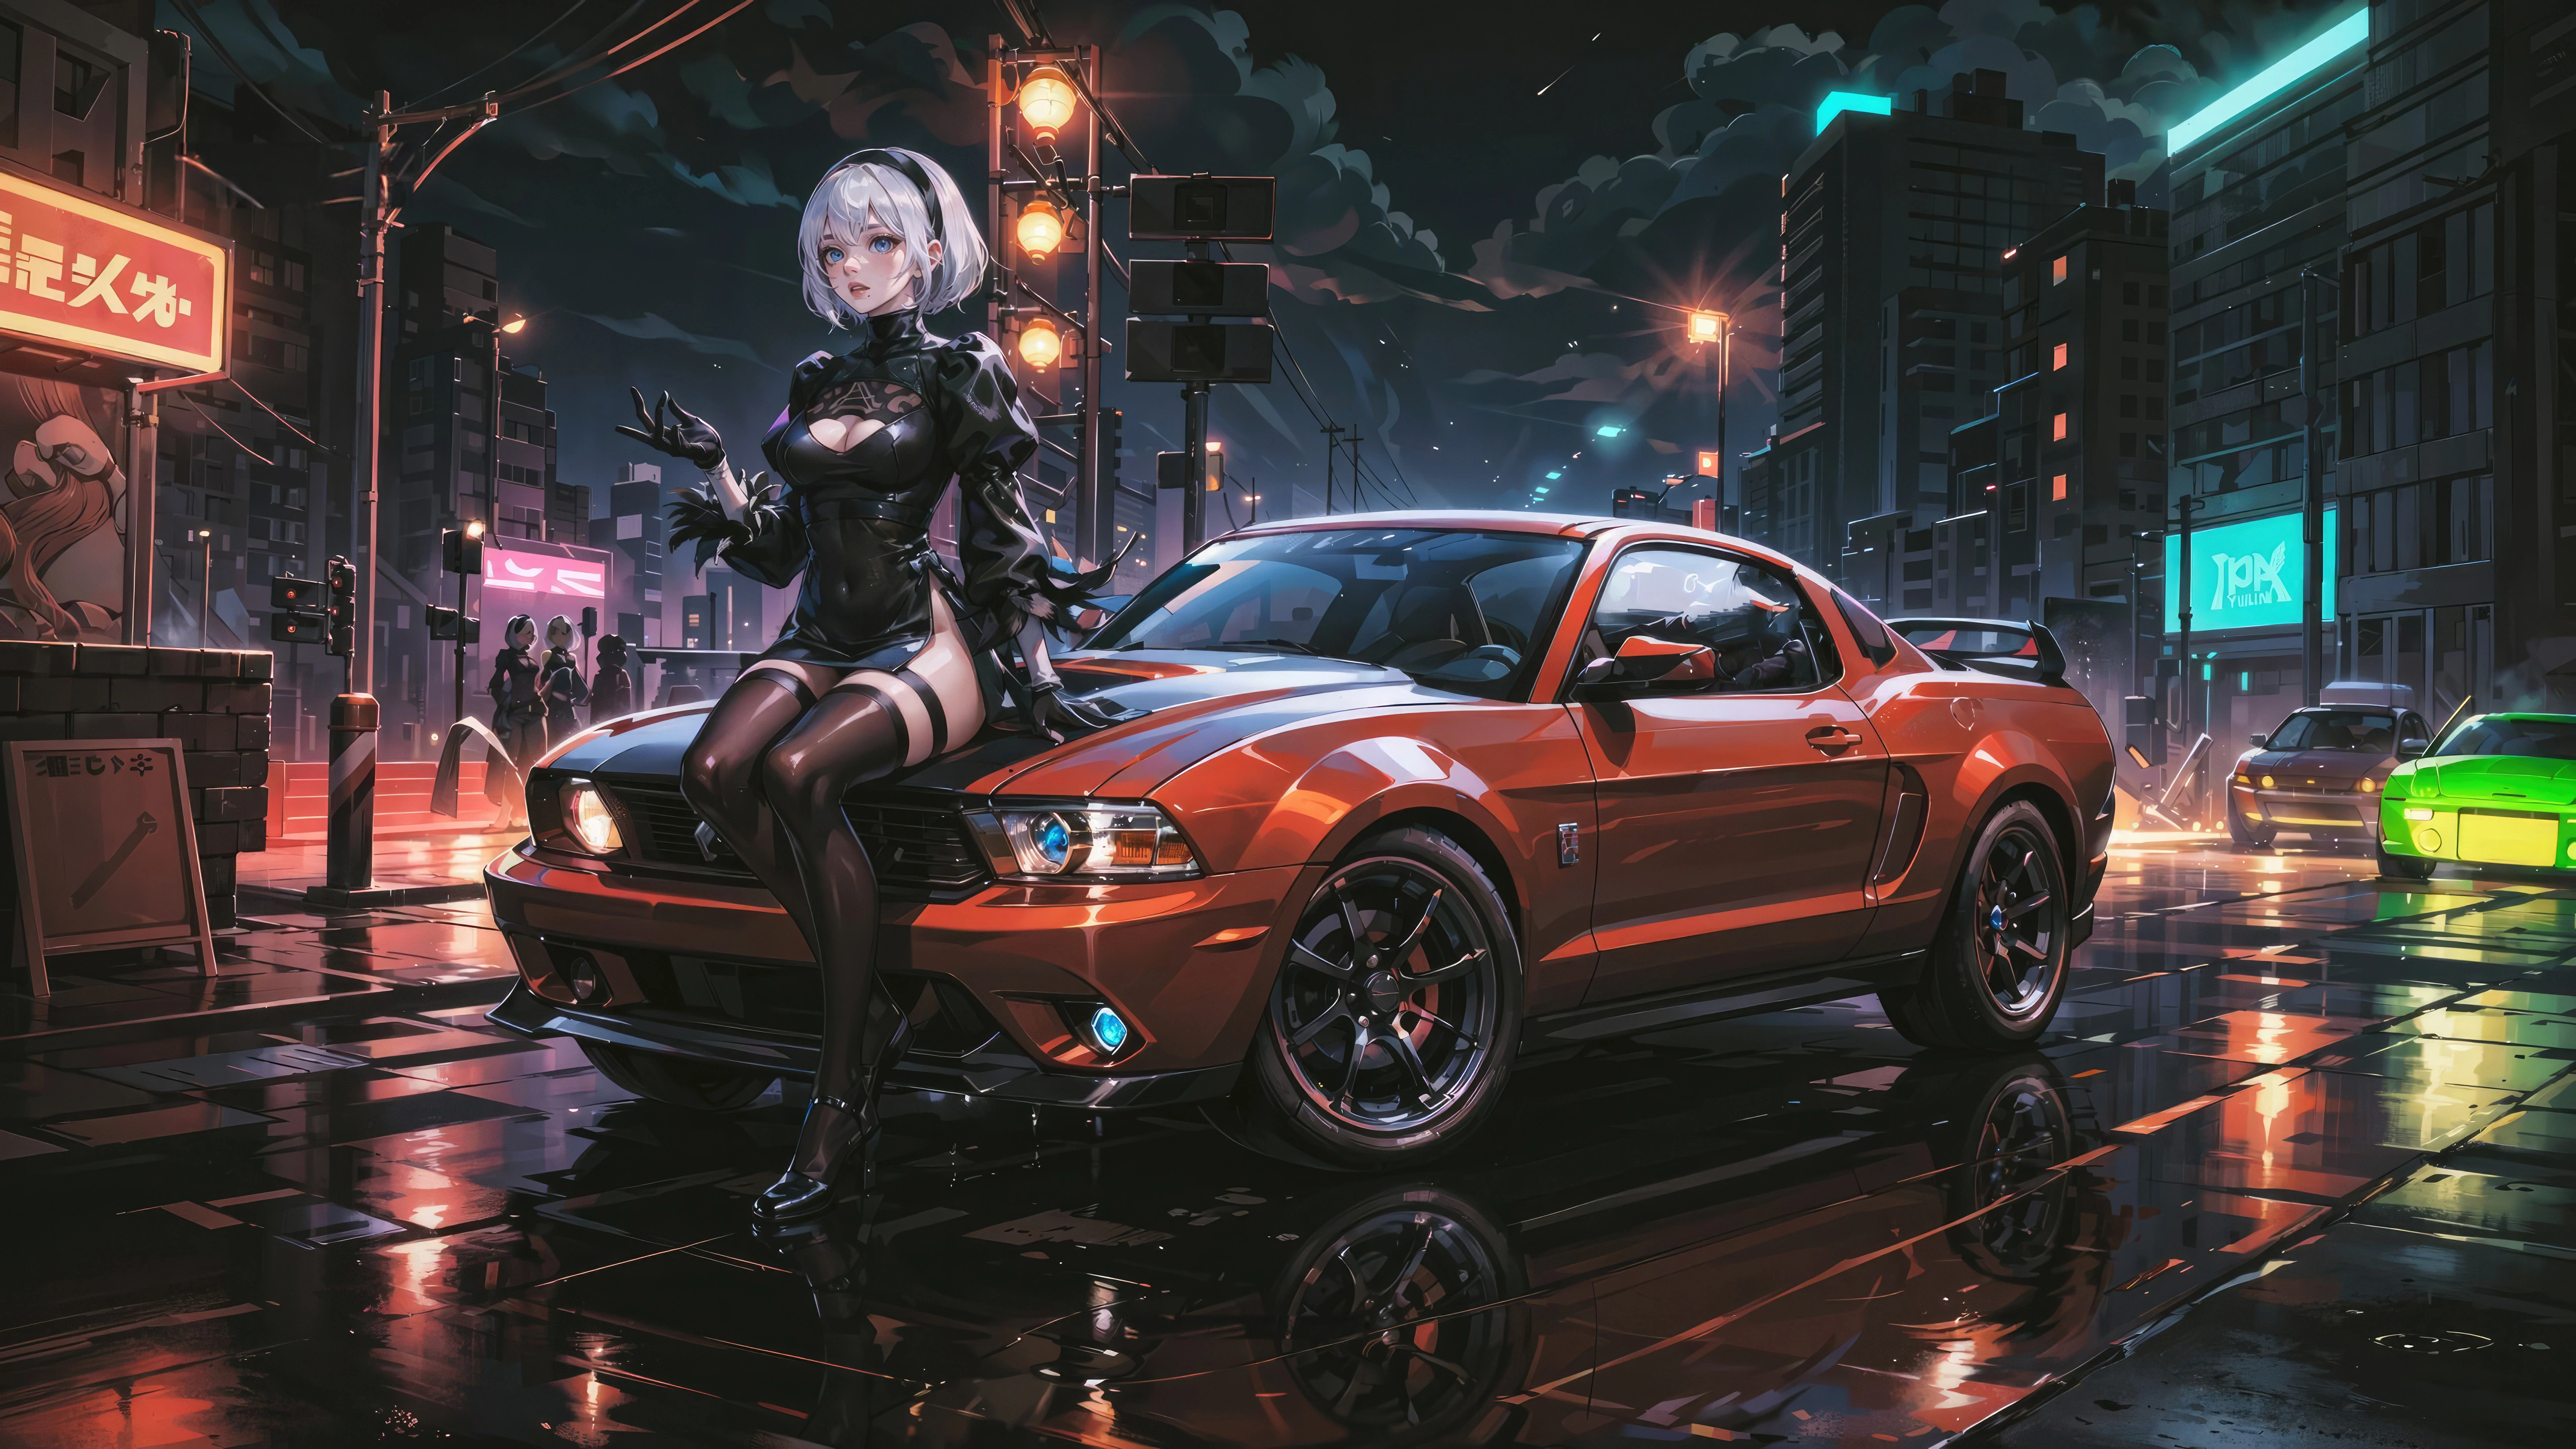 2b nier automata and her mercedes in the neon cityscape 4k 1697929730